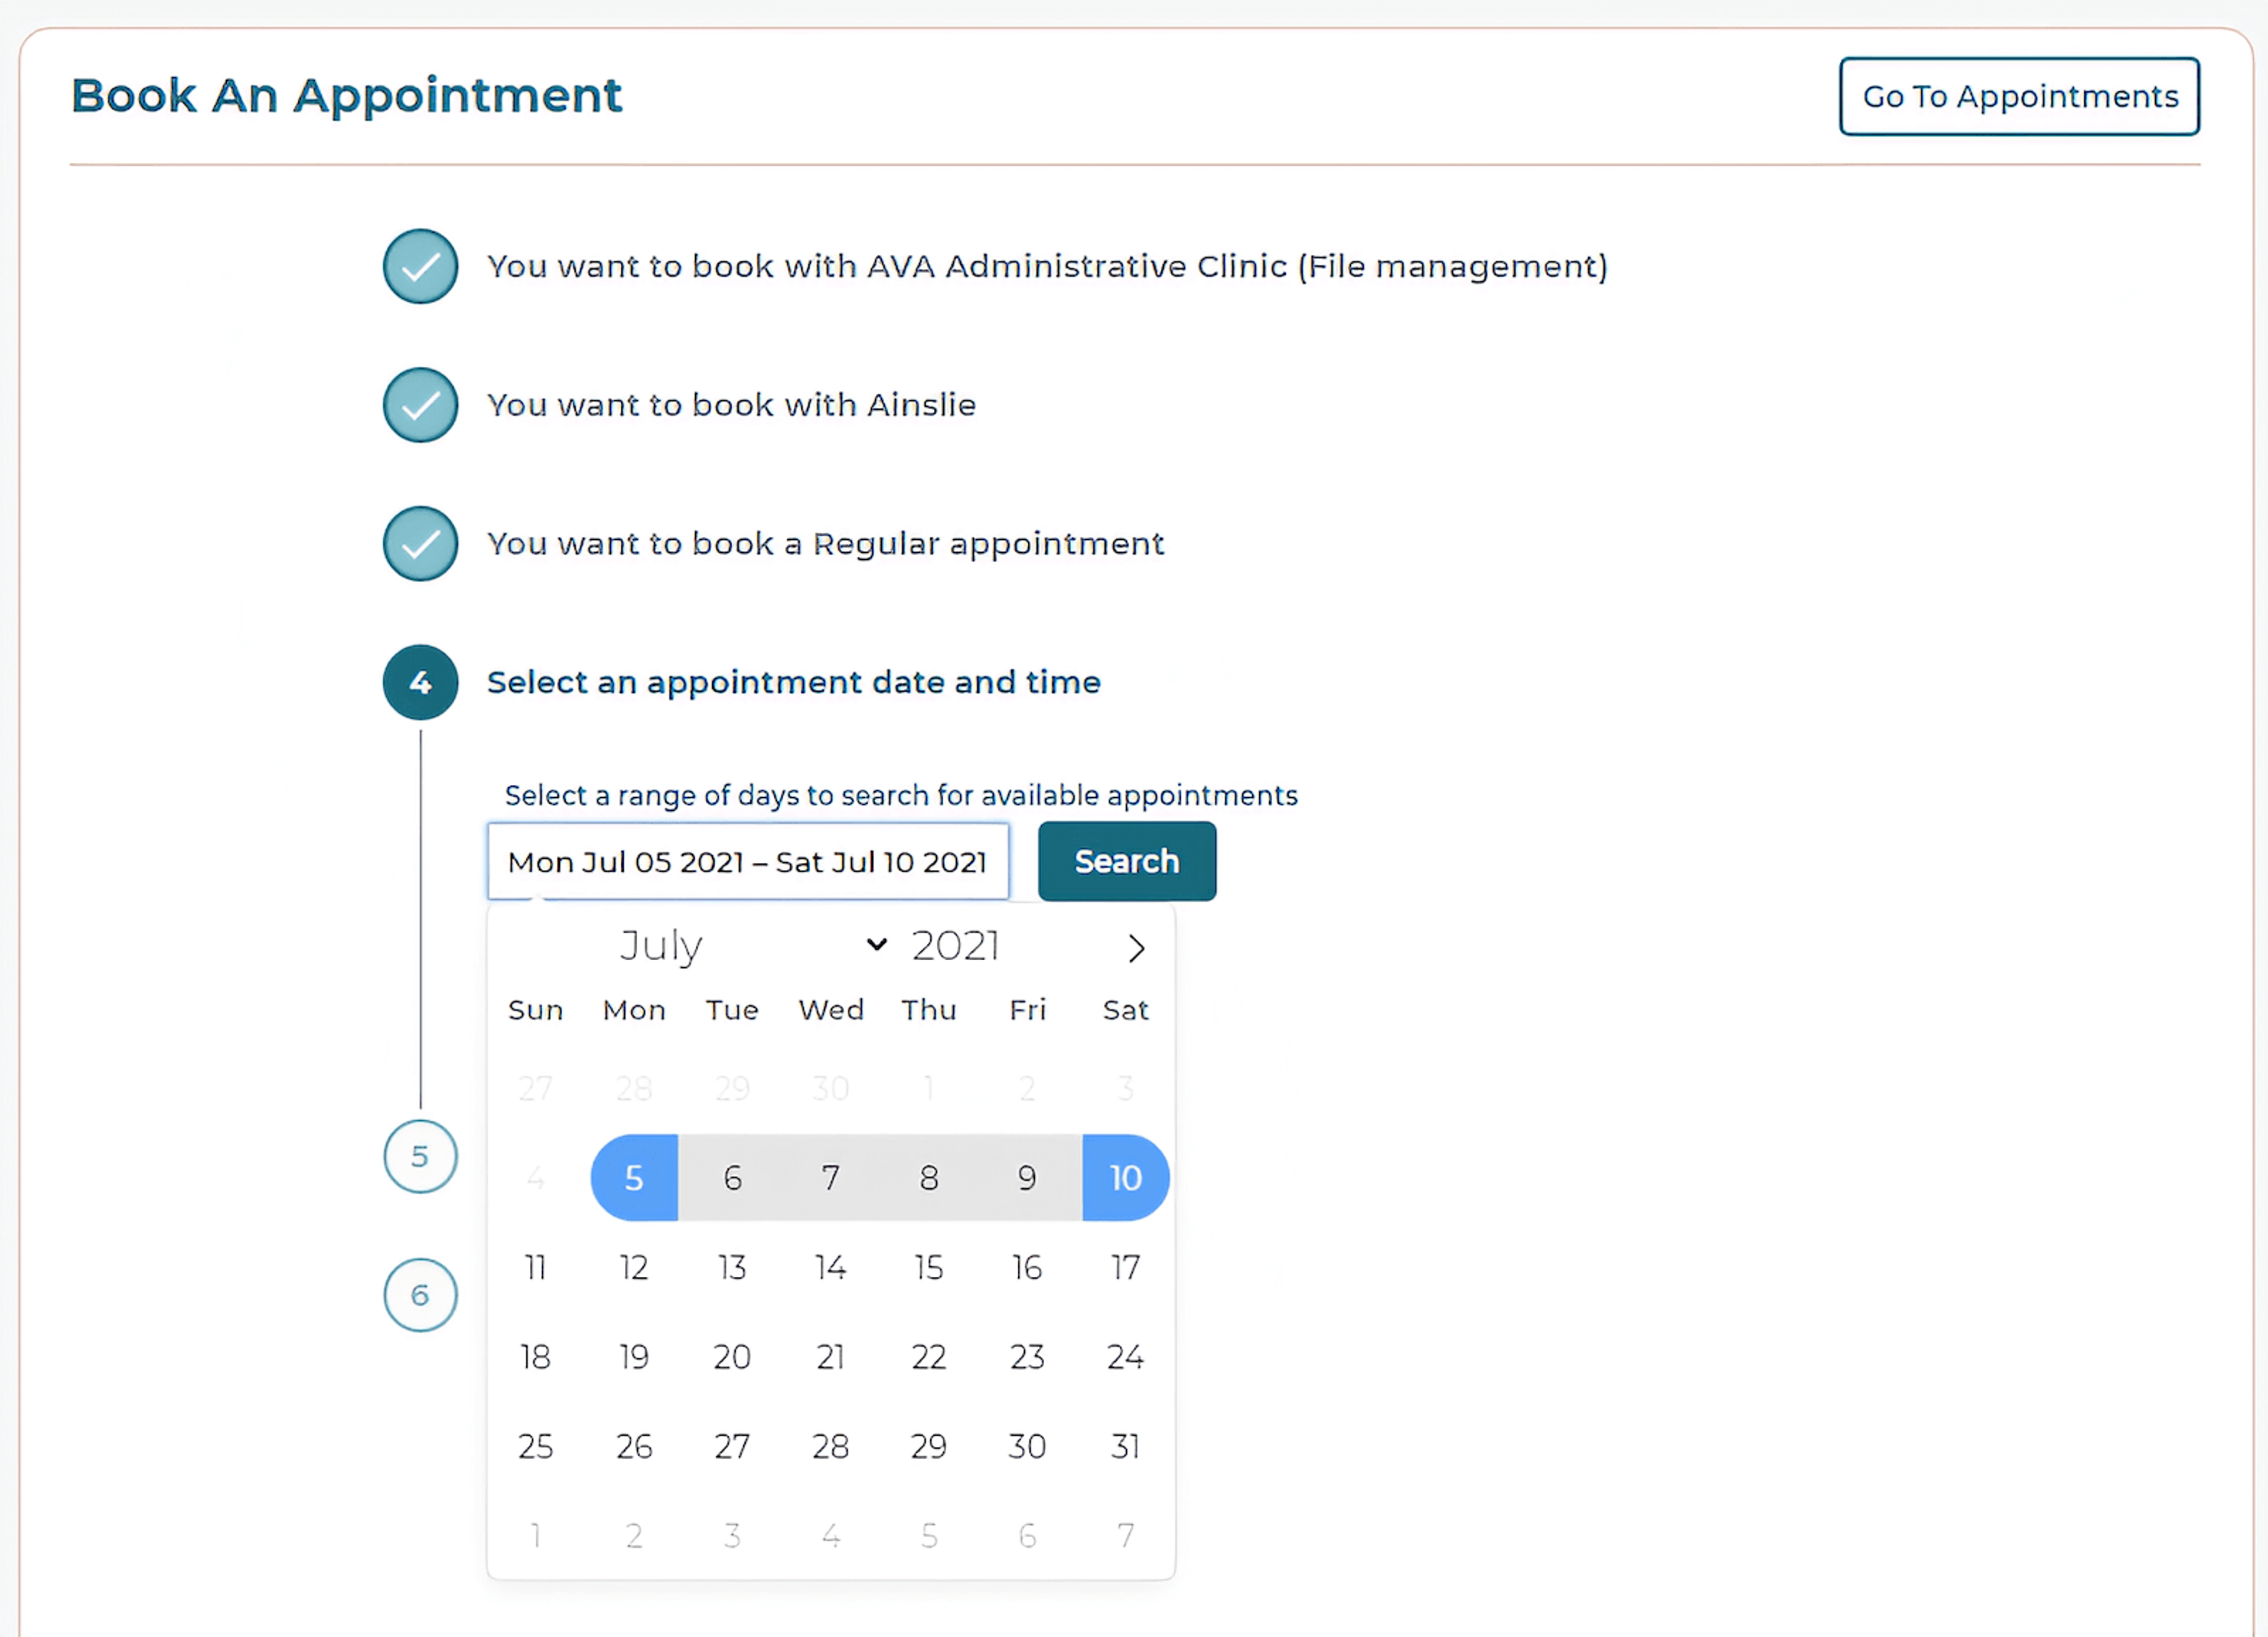 Book an Appointment checklist item 4: Select an appointment date and time.